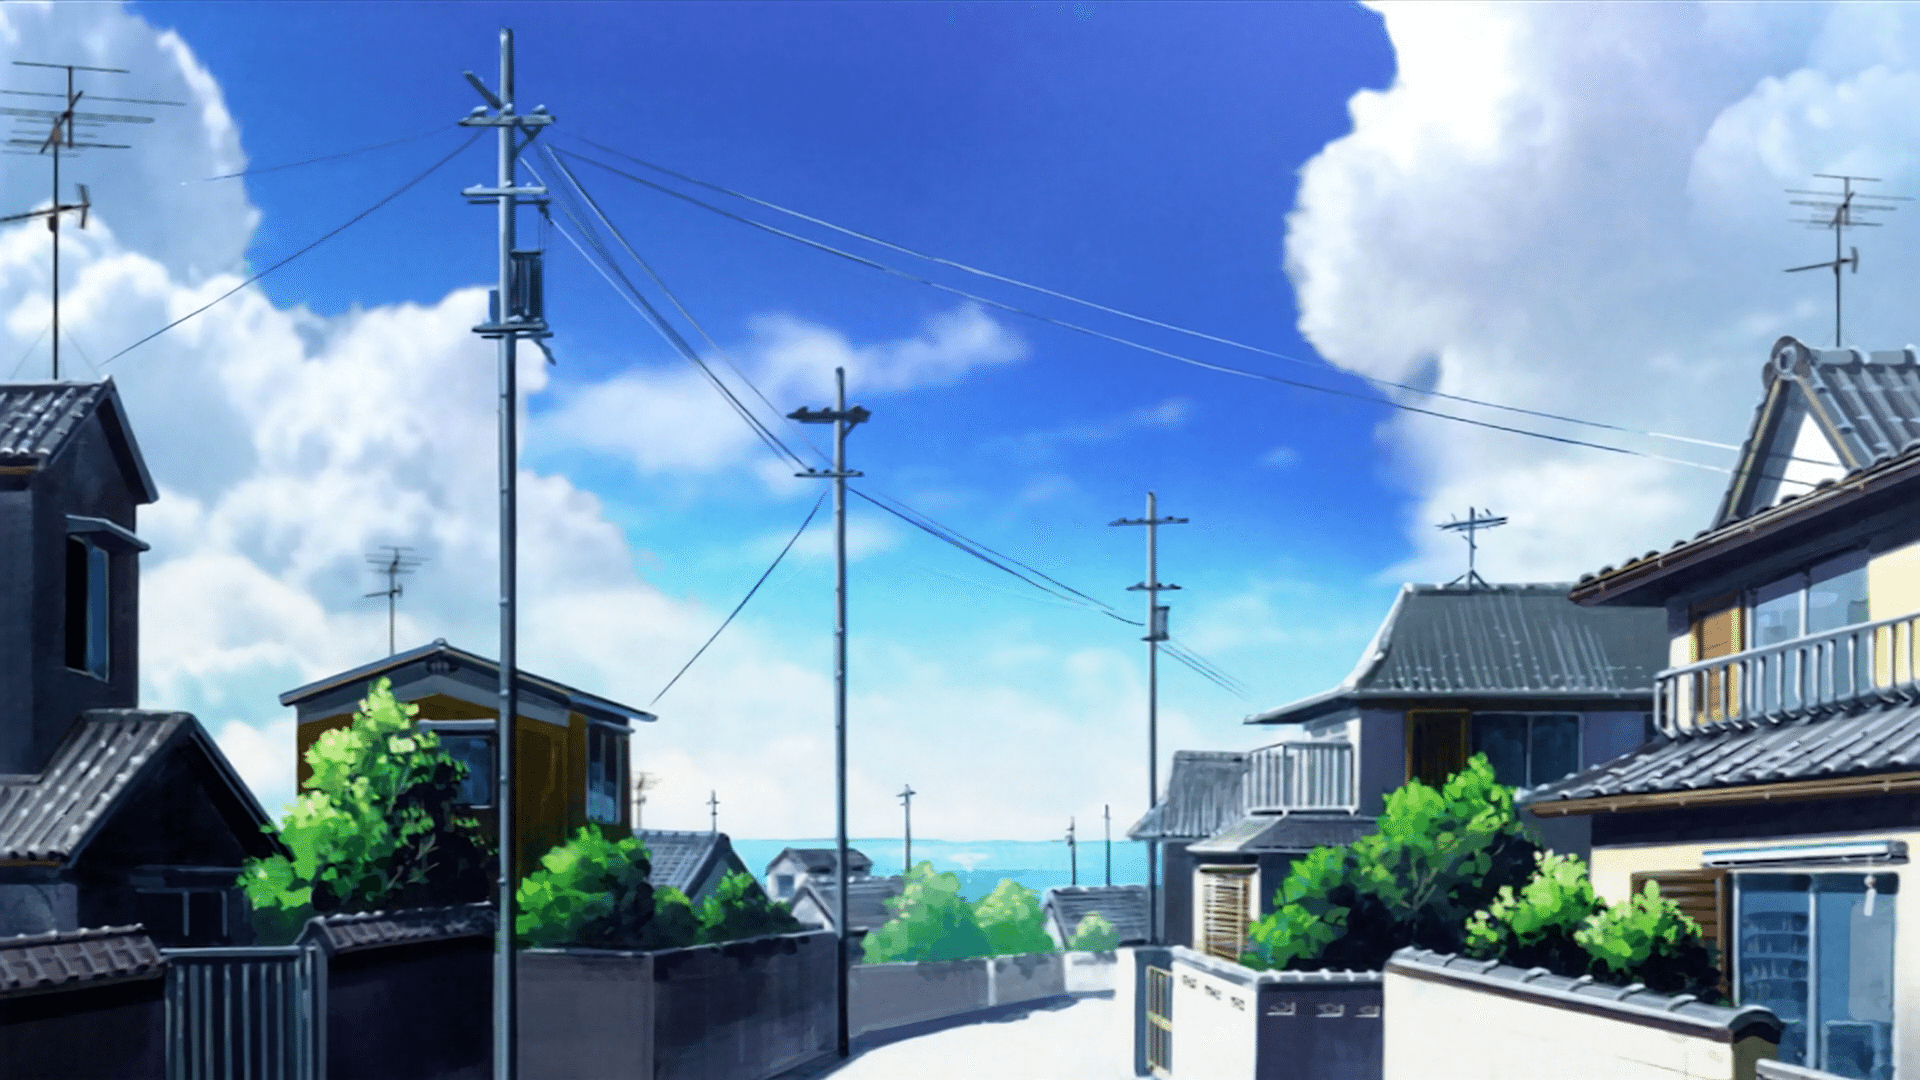 Kyoto Animation Background Art (1920x1080) HD Wallpaper From